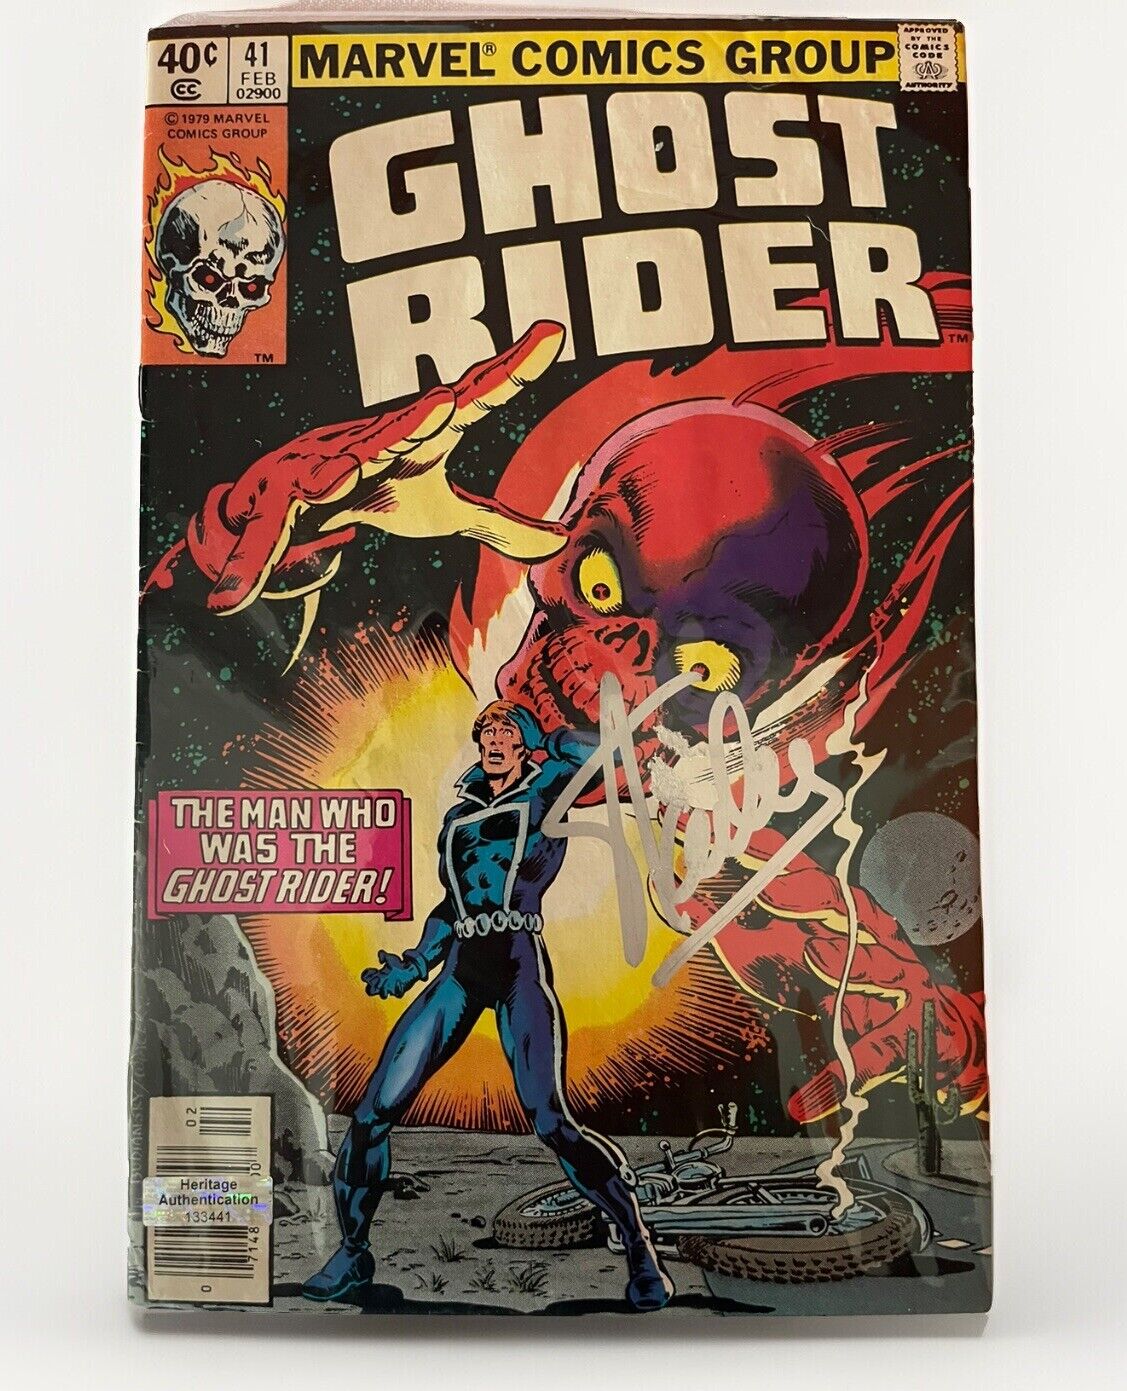 Ghost Rider #41 (Feb 1979) - Signed by Legendary Stan Lee. Rare Marvel Comic